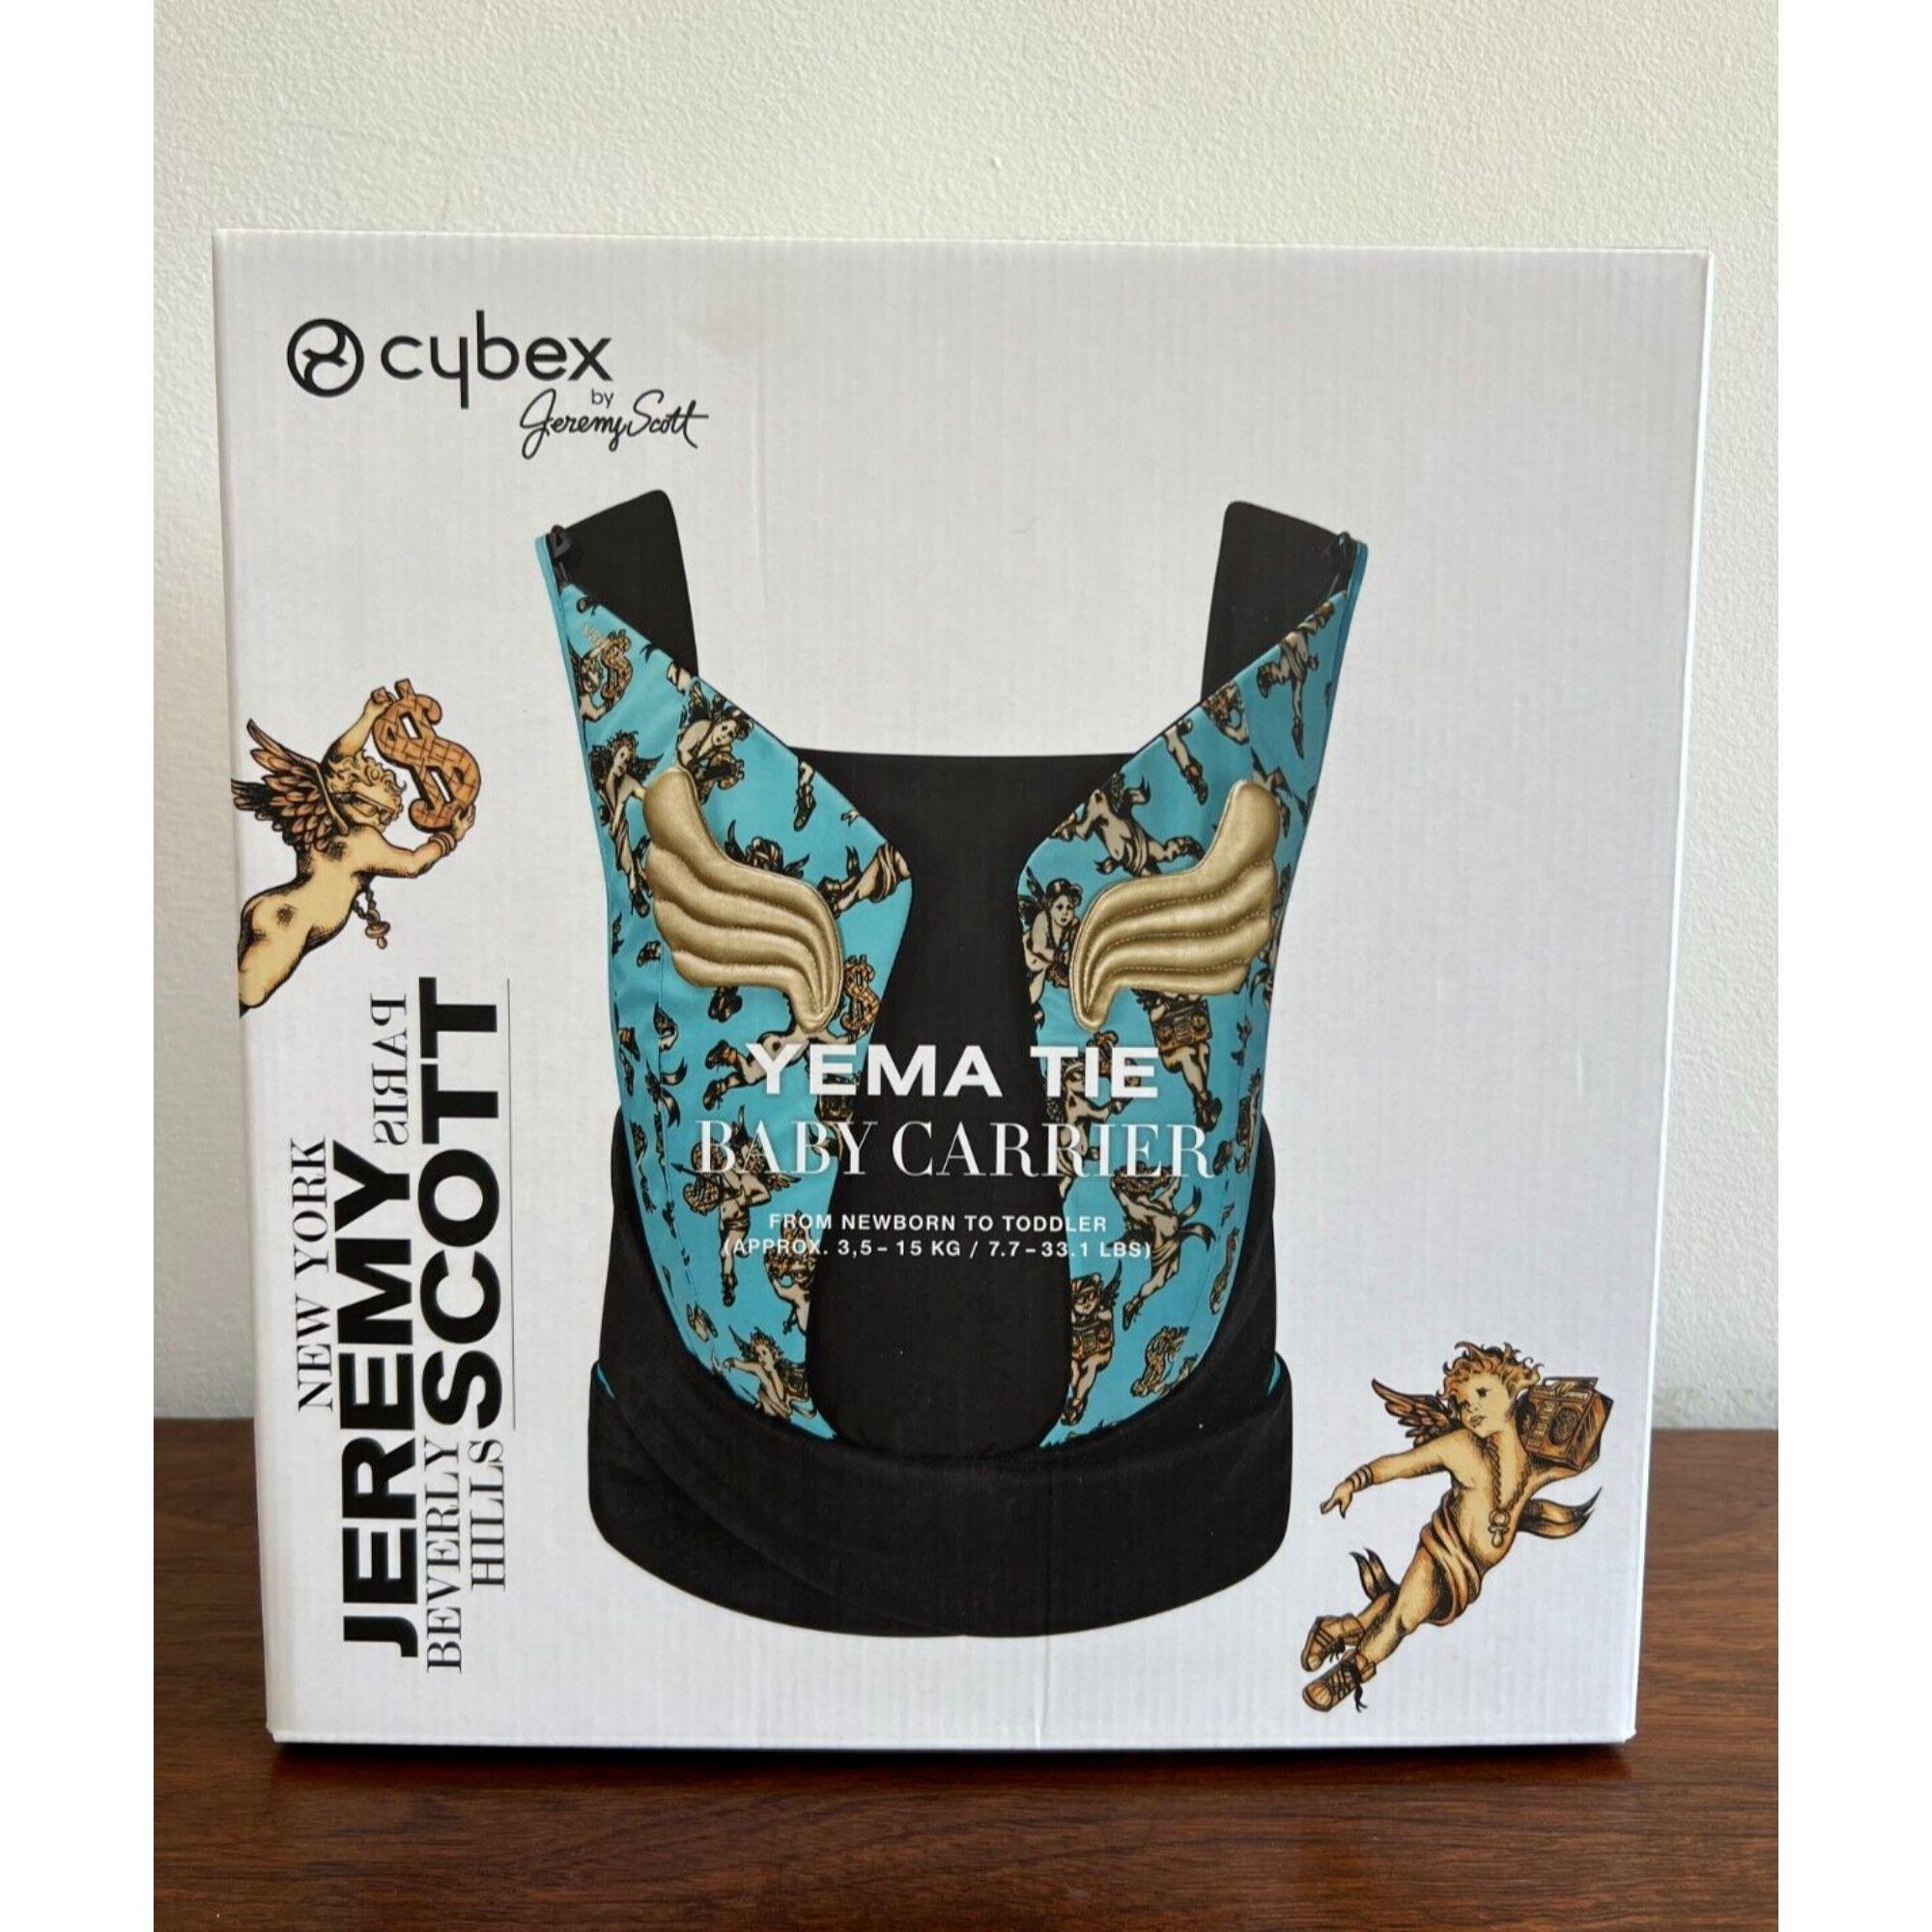 Cybex x Jeremy Scott Yema Tie Baby Carrier Blue and Gold by Cherubs Wings Angel

Additional Information:
Color: Blue, Gold, Black
Pattern: Wings, Angels
Condition: Brand new, original double boxed, never removed from box